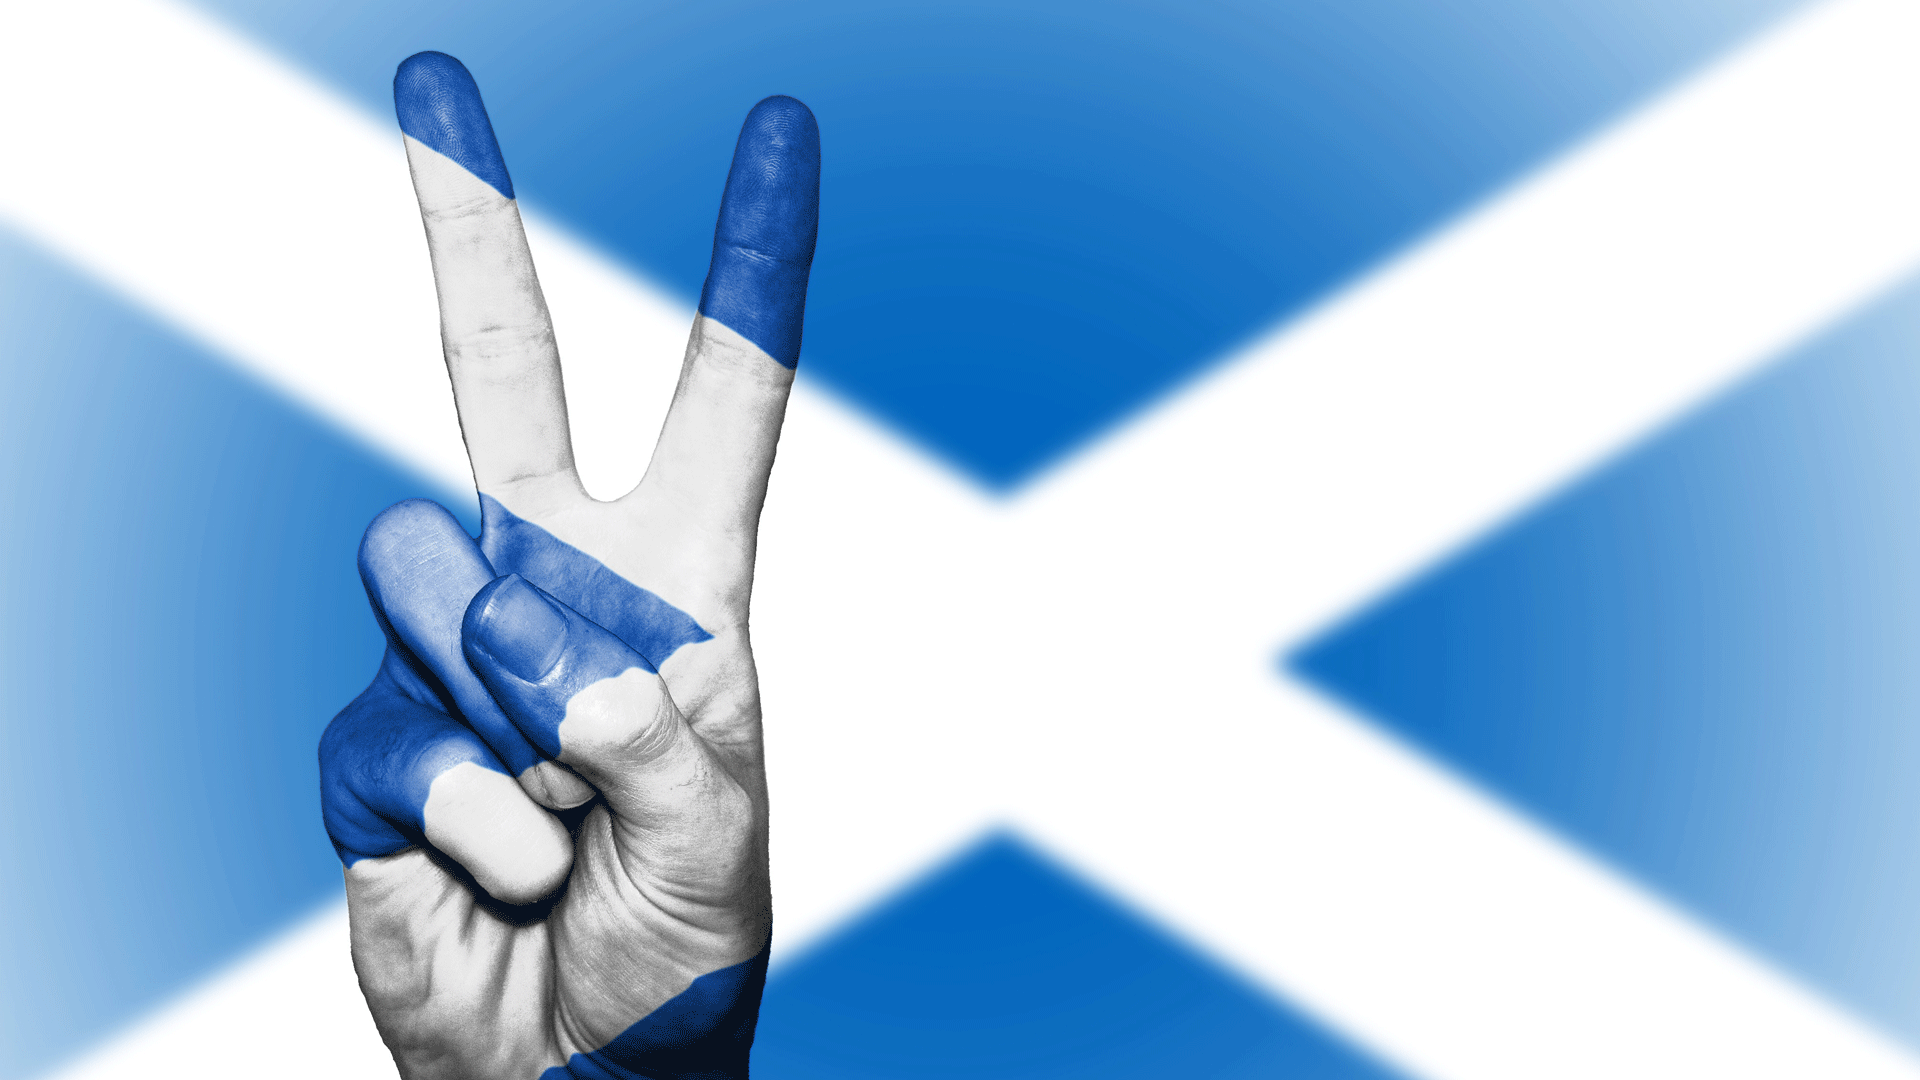 Scotland flag with hand giving peace sign